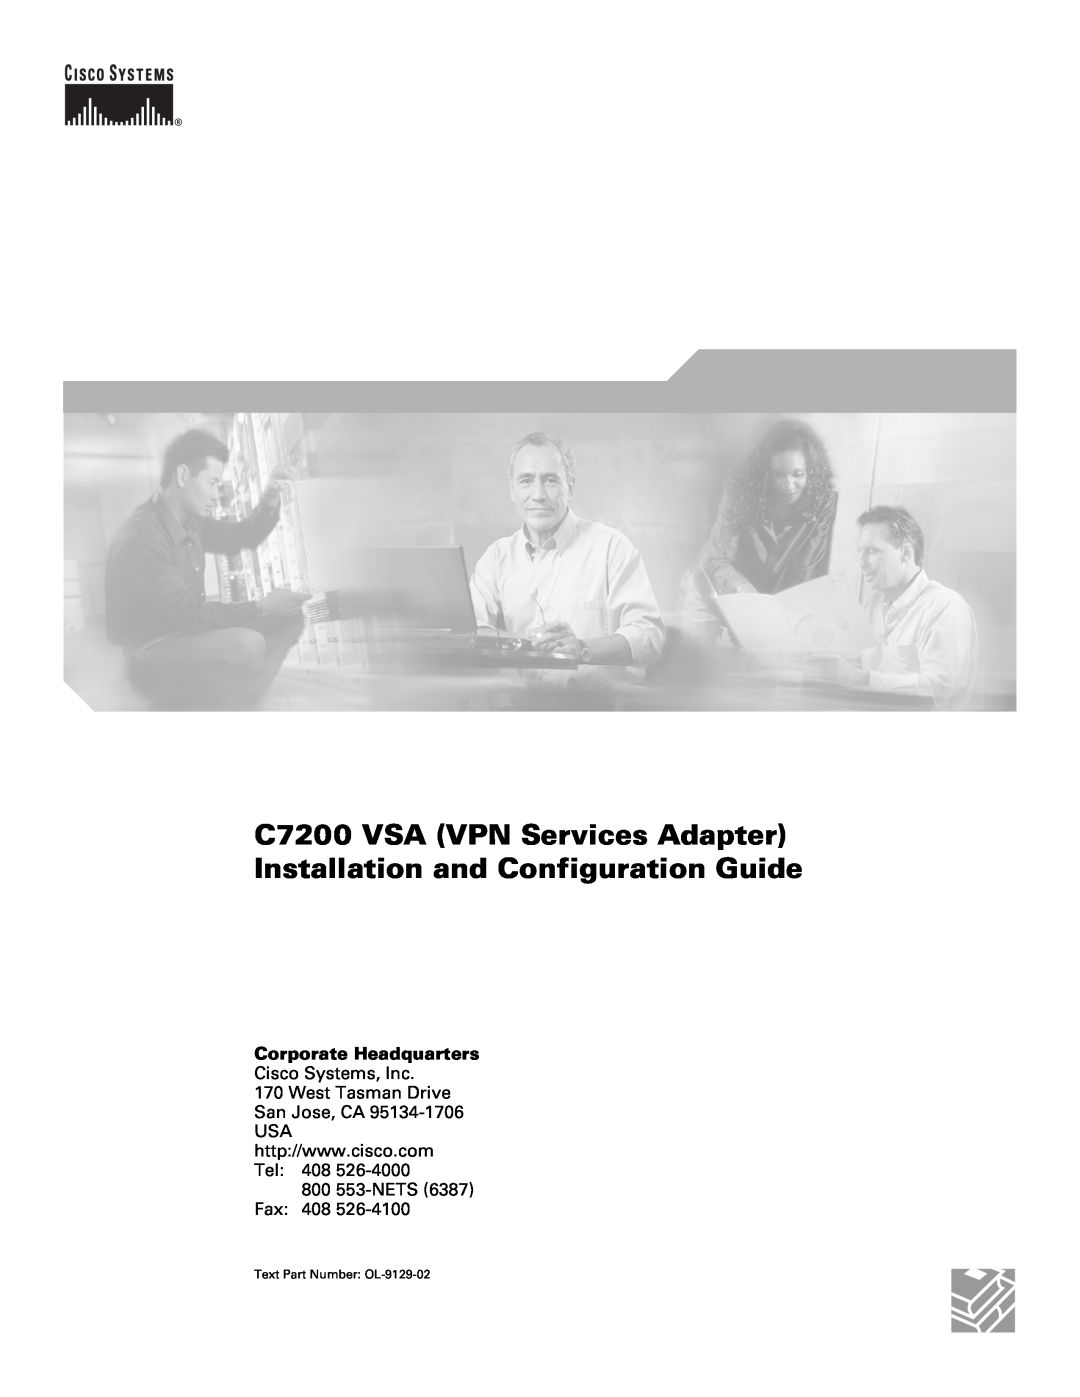 Cisco Systems manual C7200 VSA VPN Services Adapter Installation and Configuration Guide, Corporate Headquarters 